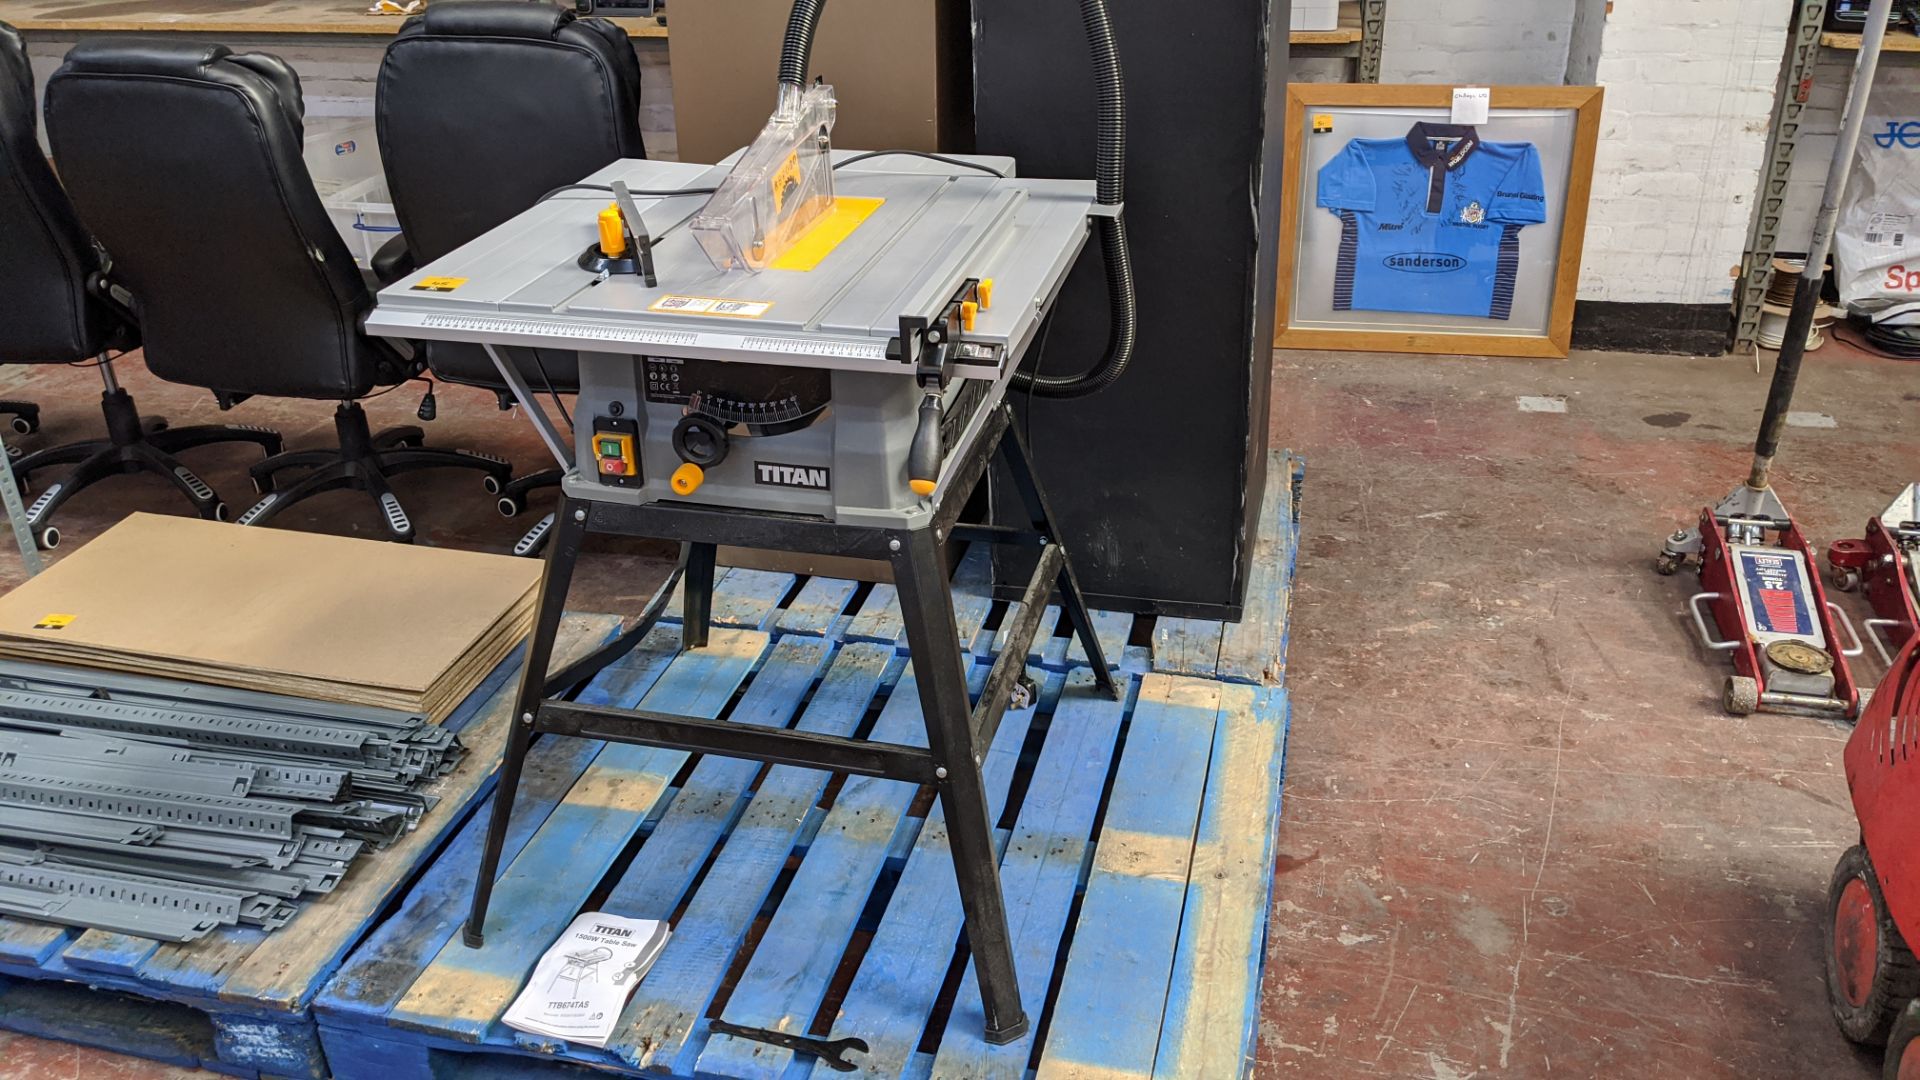 Titan 1500w table saw model TTB674TAS. Lots 22 - 53 are all located inside our warehouse. Please